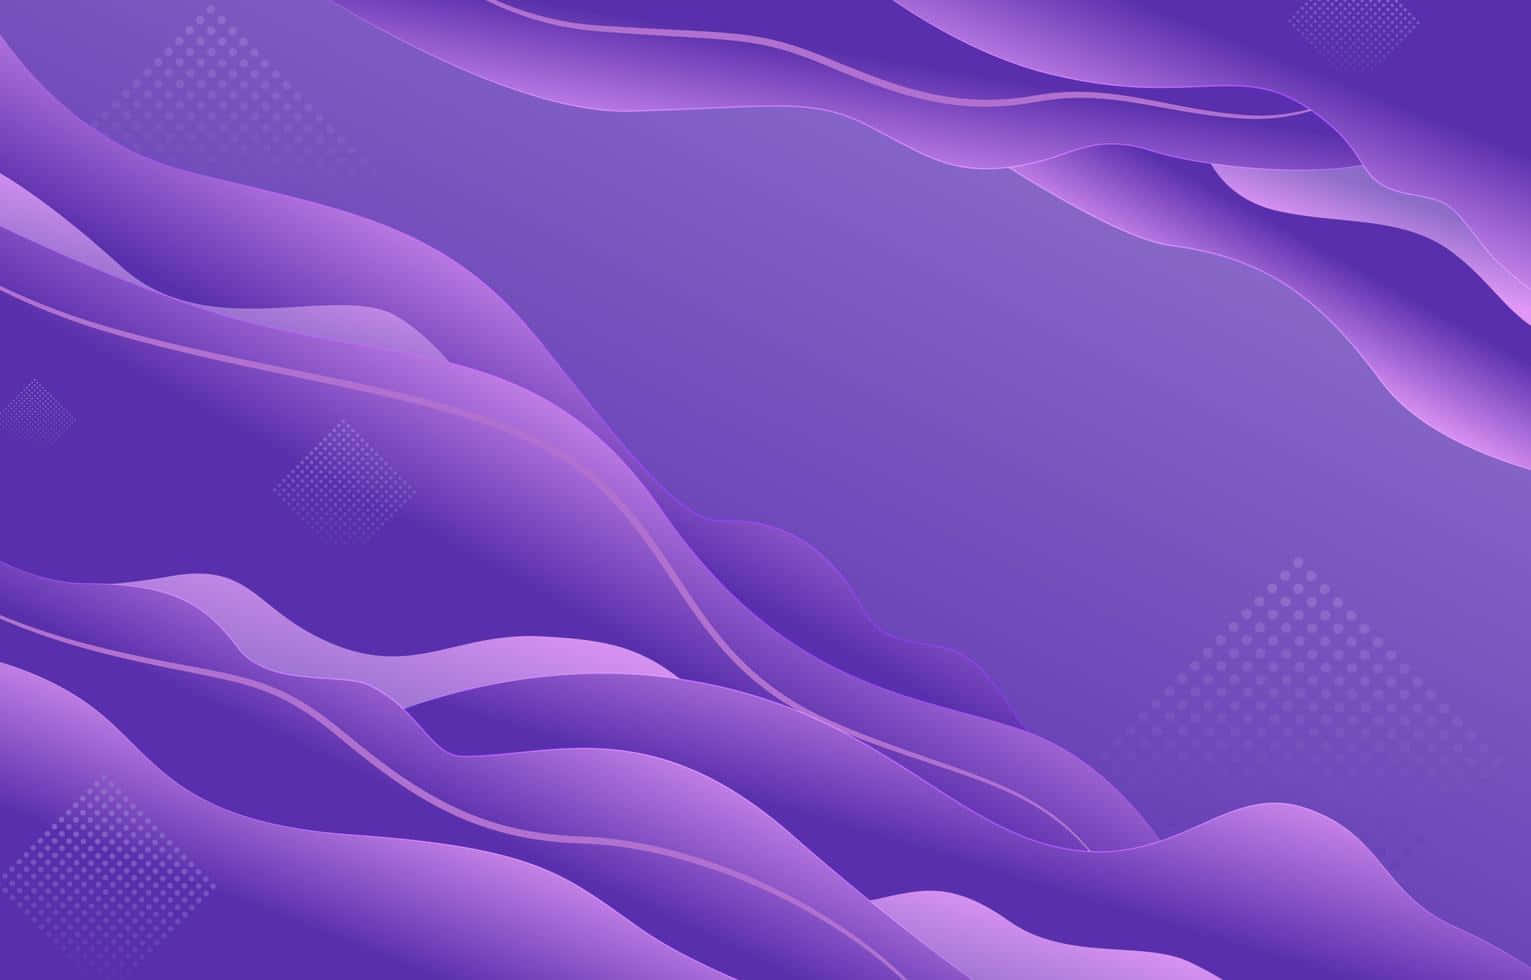 Abstract Waves Of Lilac Background